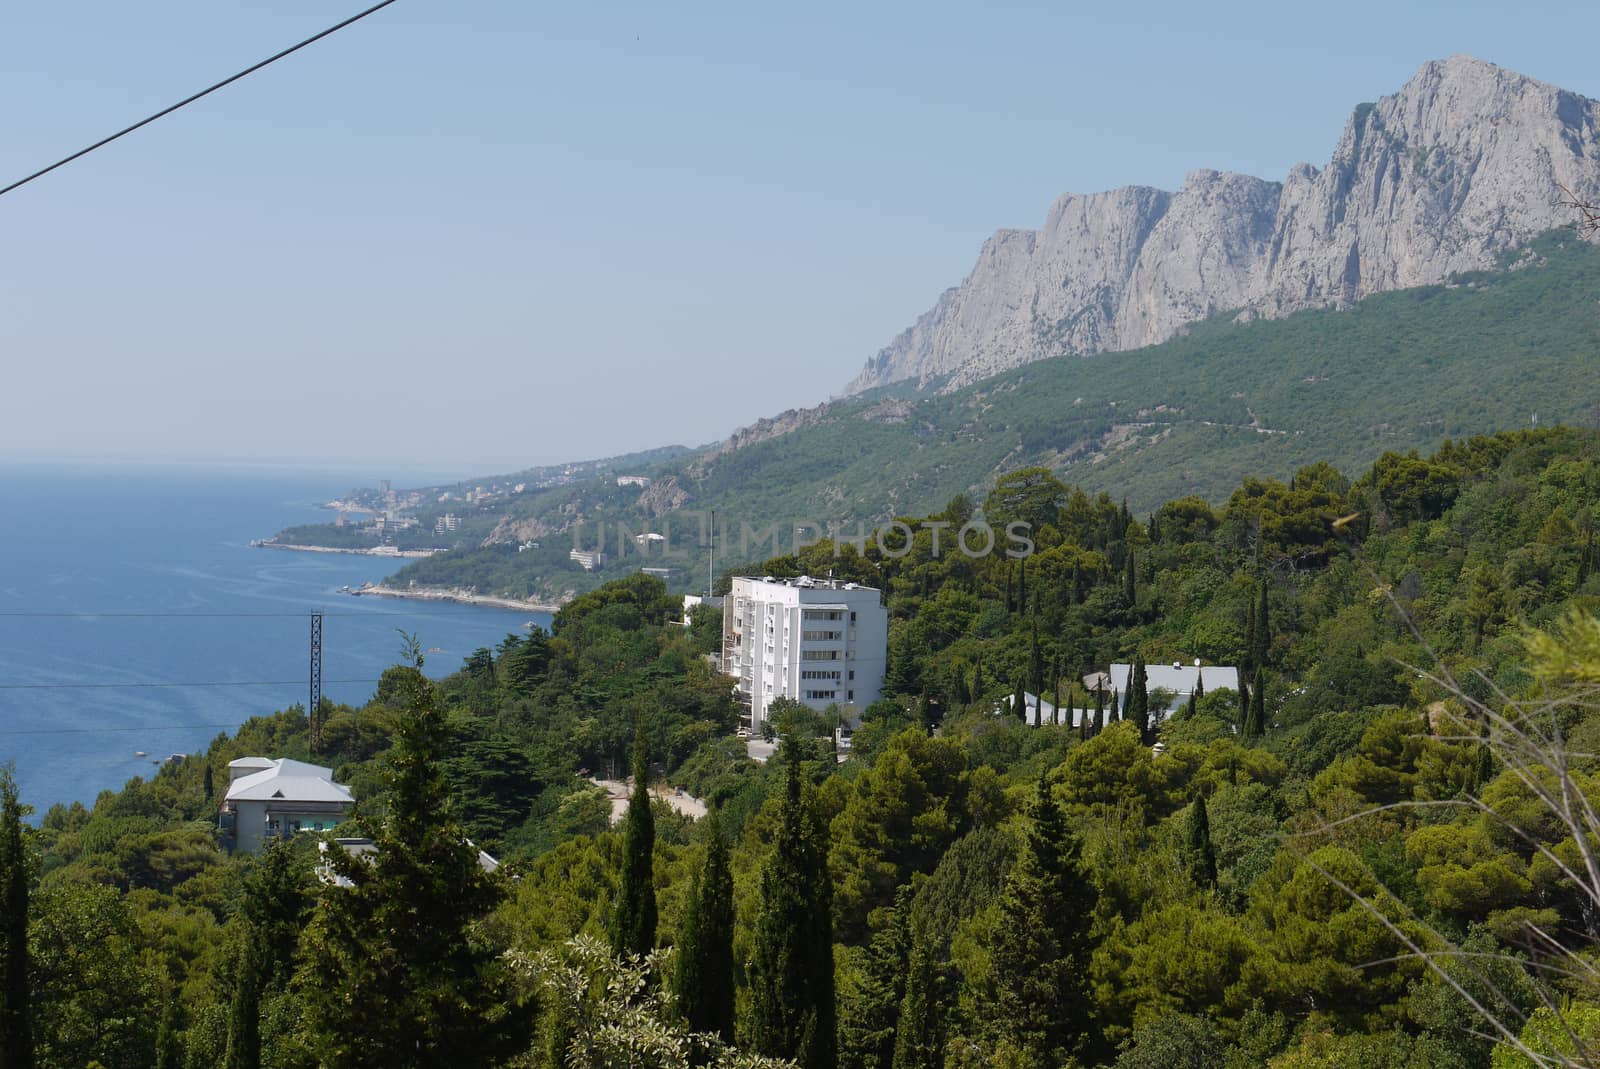 A beautiful landscape of nature near the sea coast with green slopes houses looking out between the trees and the blue sea stretching away to the horizon line.